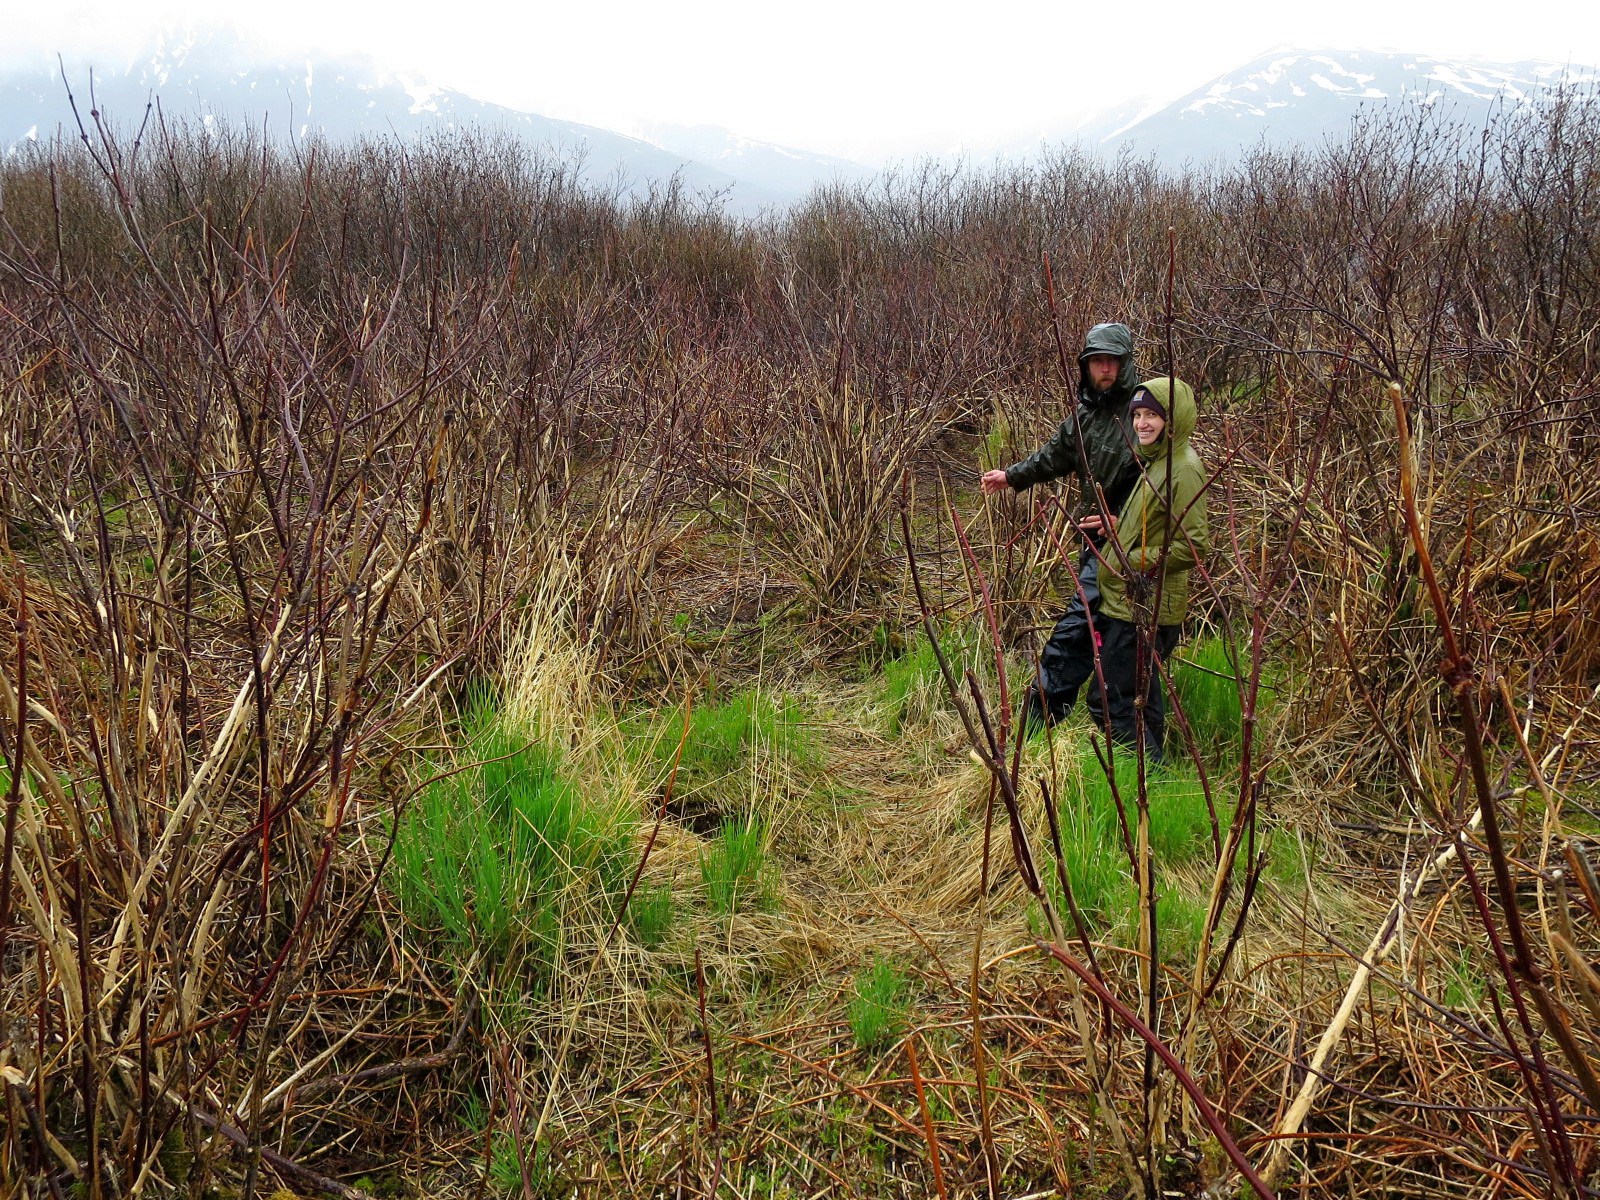 Danny Hernandez and Danielle Butts, who are working on the study, stand in a bush of elderberries. (Photo courtesy of the Kodiak National Wildlife Refuge)